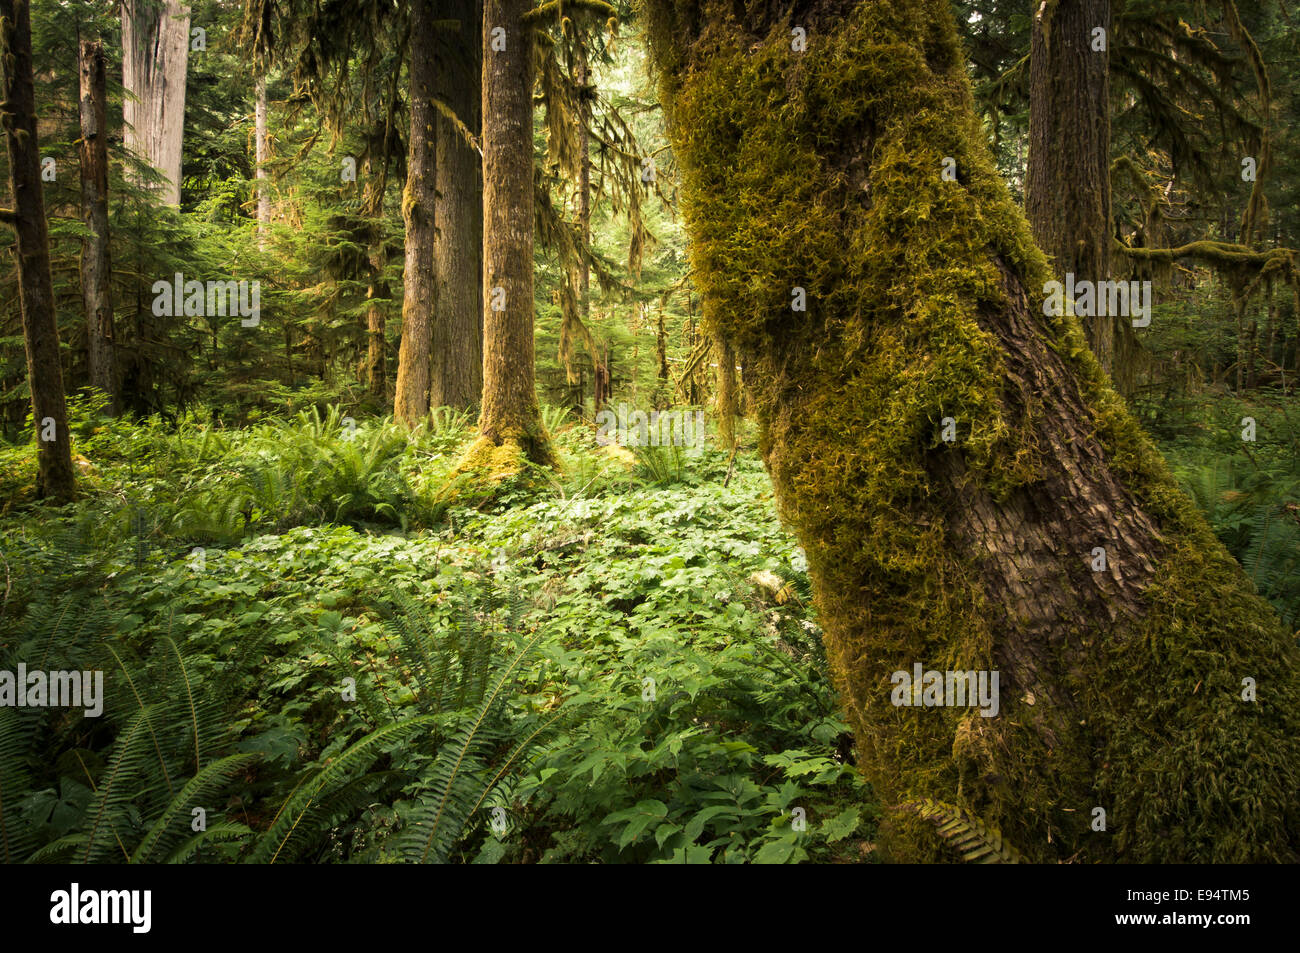 Old growth forest, Staircase Area, Olympic National Park, Washington, USA Stock Photo